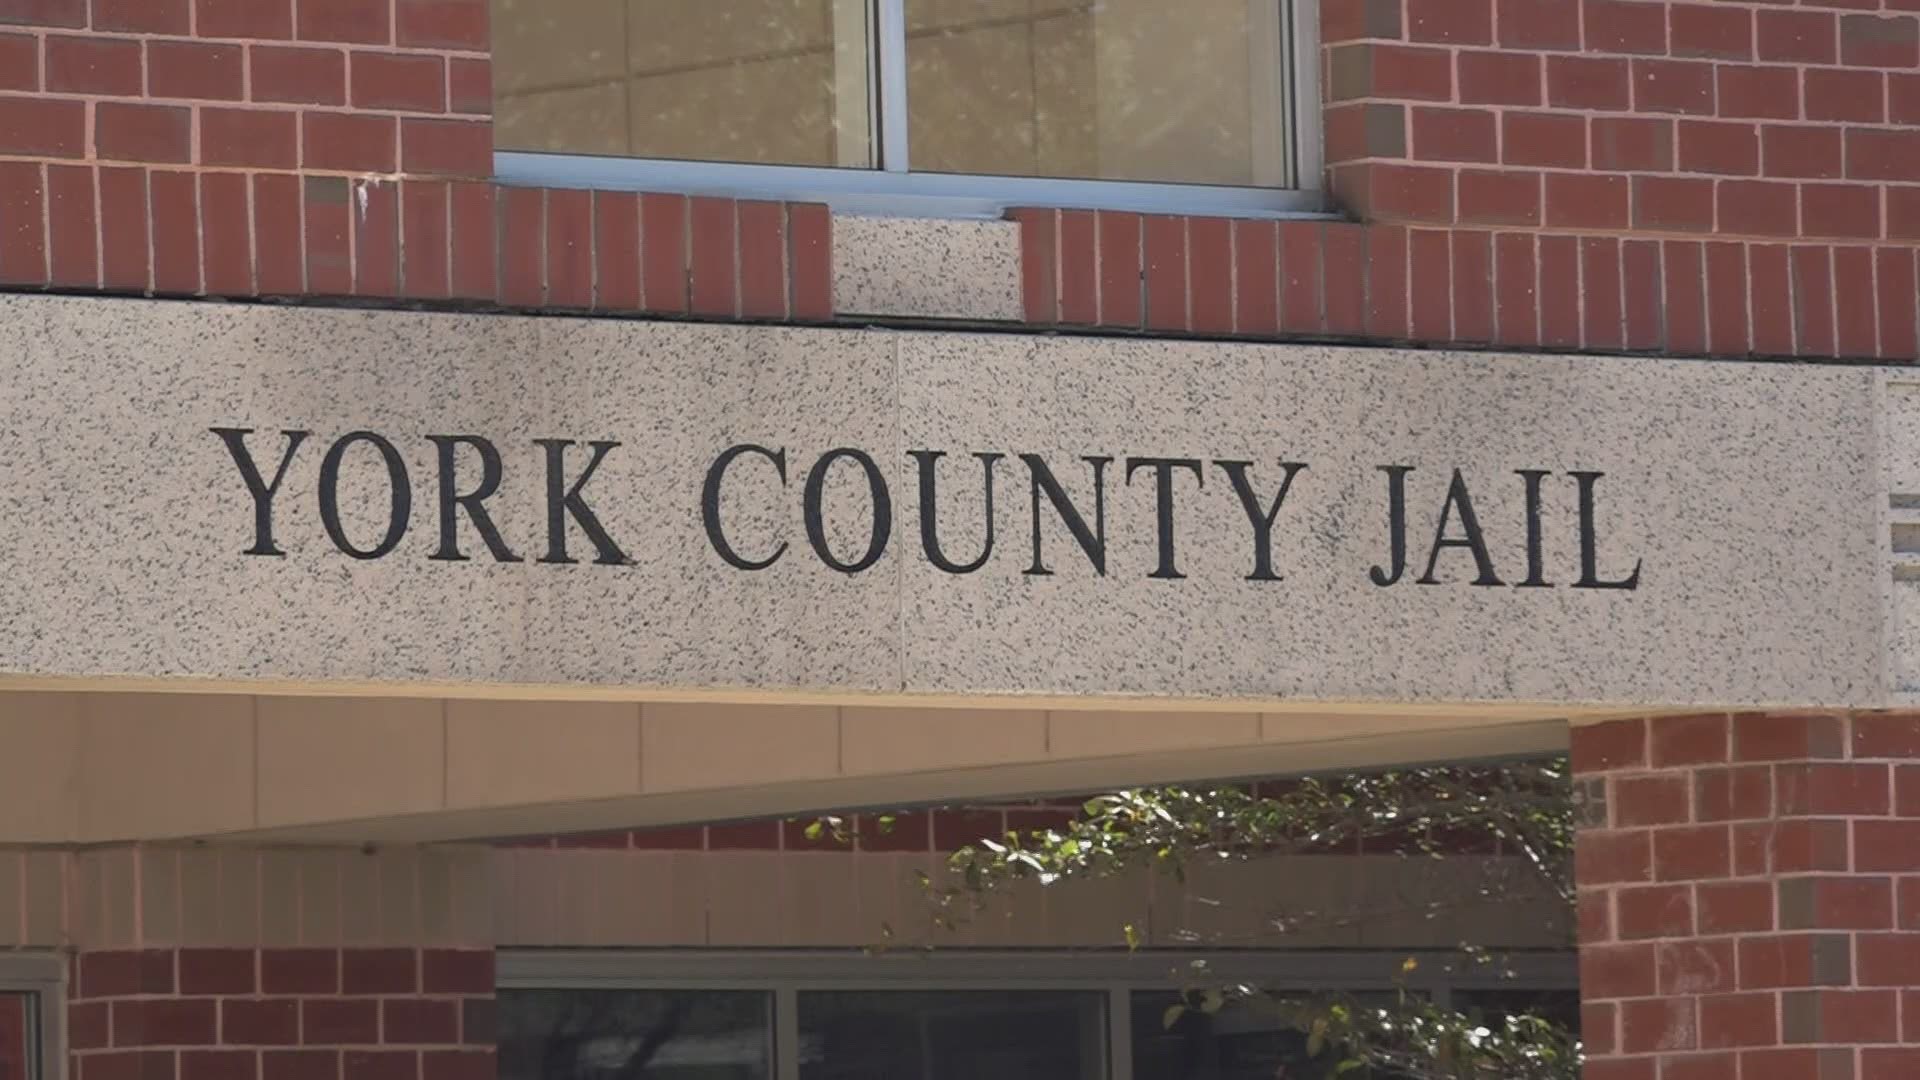 Advocates call for early release of inmates at York County Jail amid COVID-19 outbreak